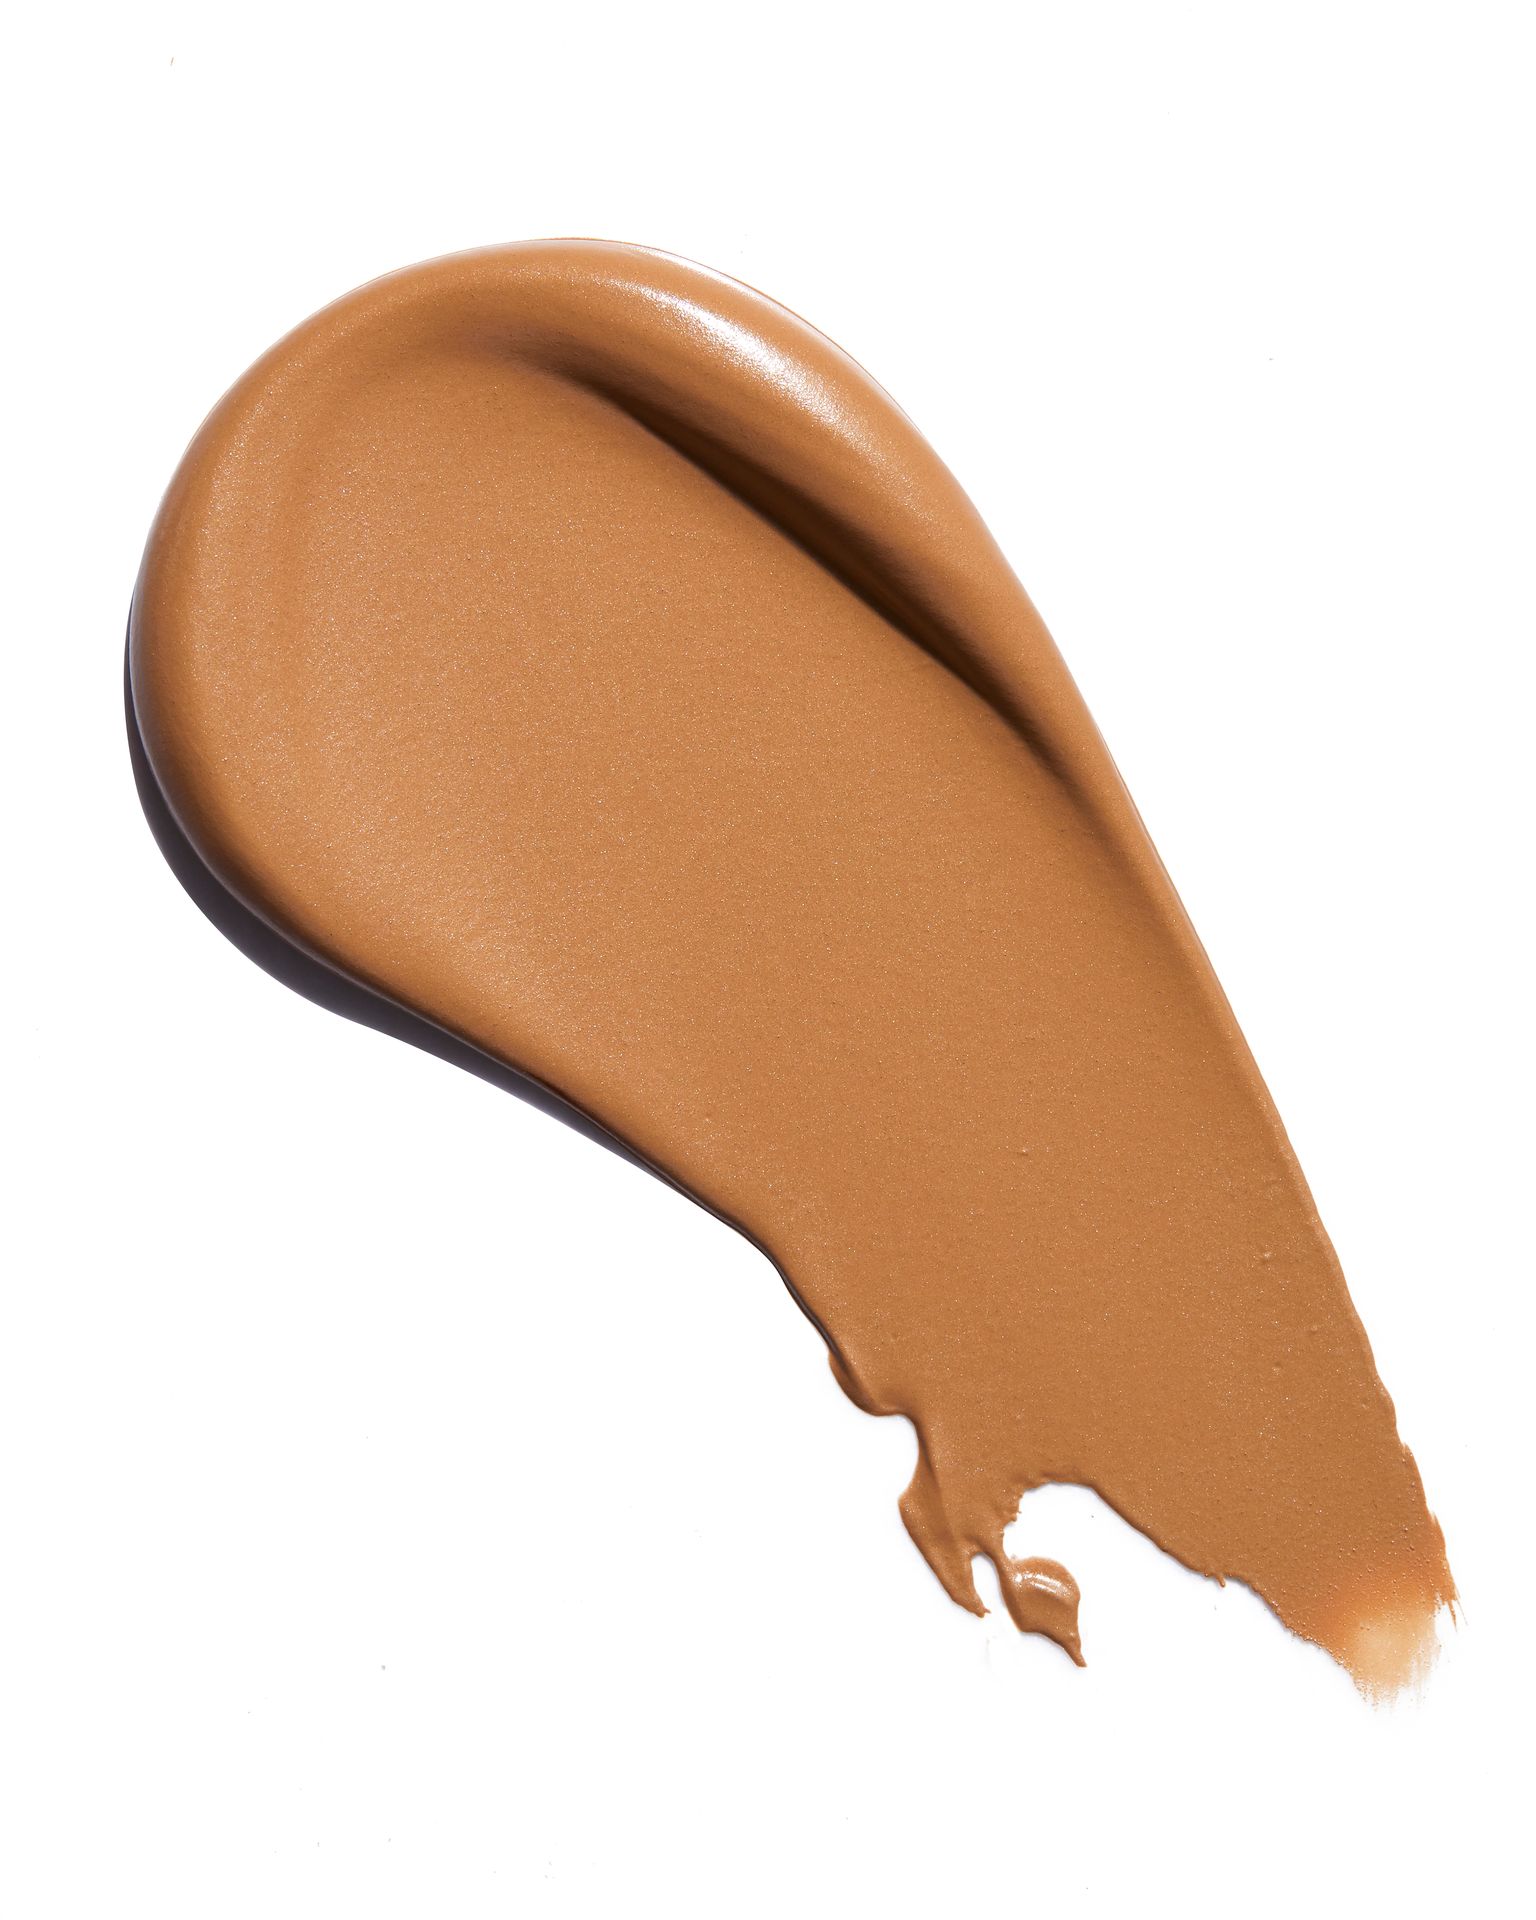 Sculpted By Aimee Connolly Body Base Instant Body Tan Shimmer Light